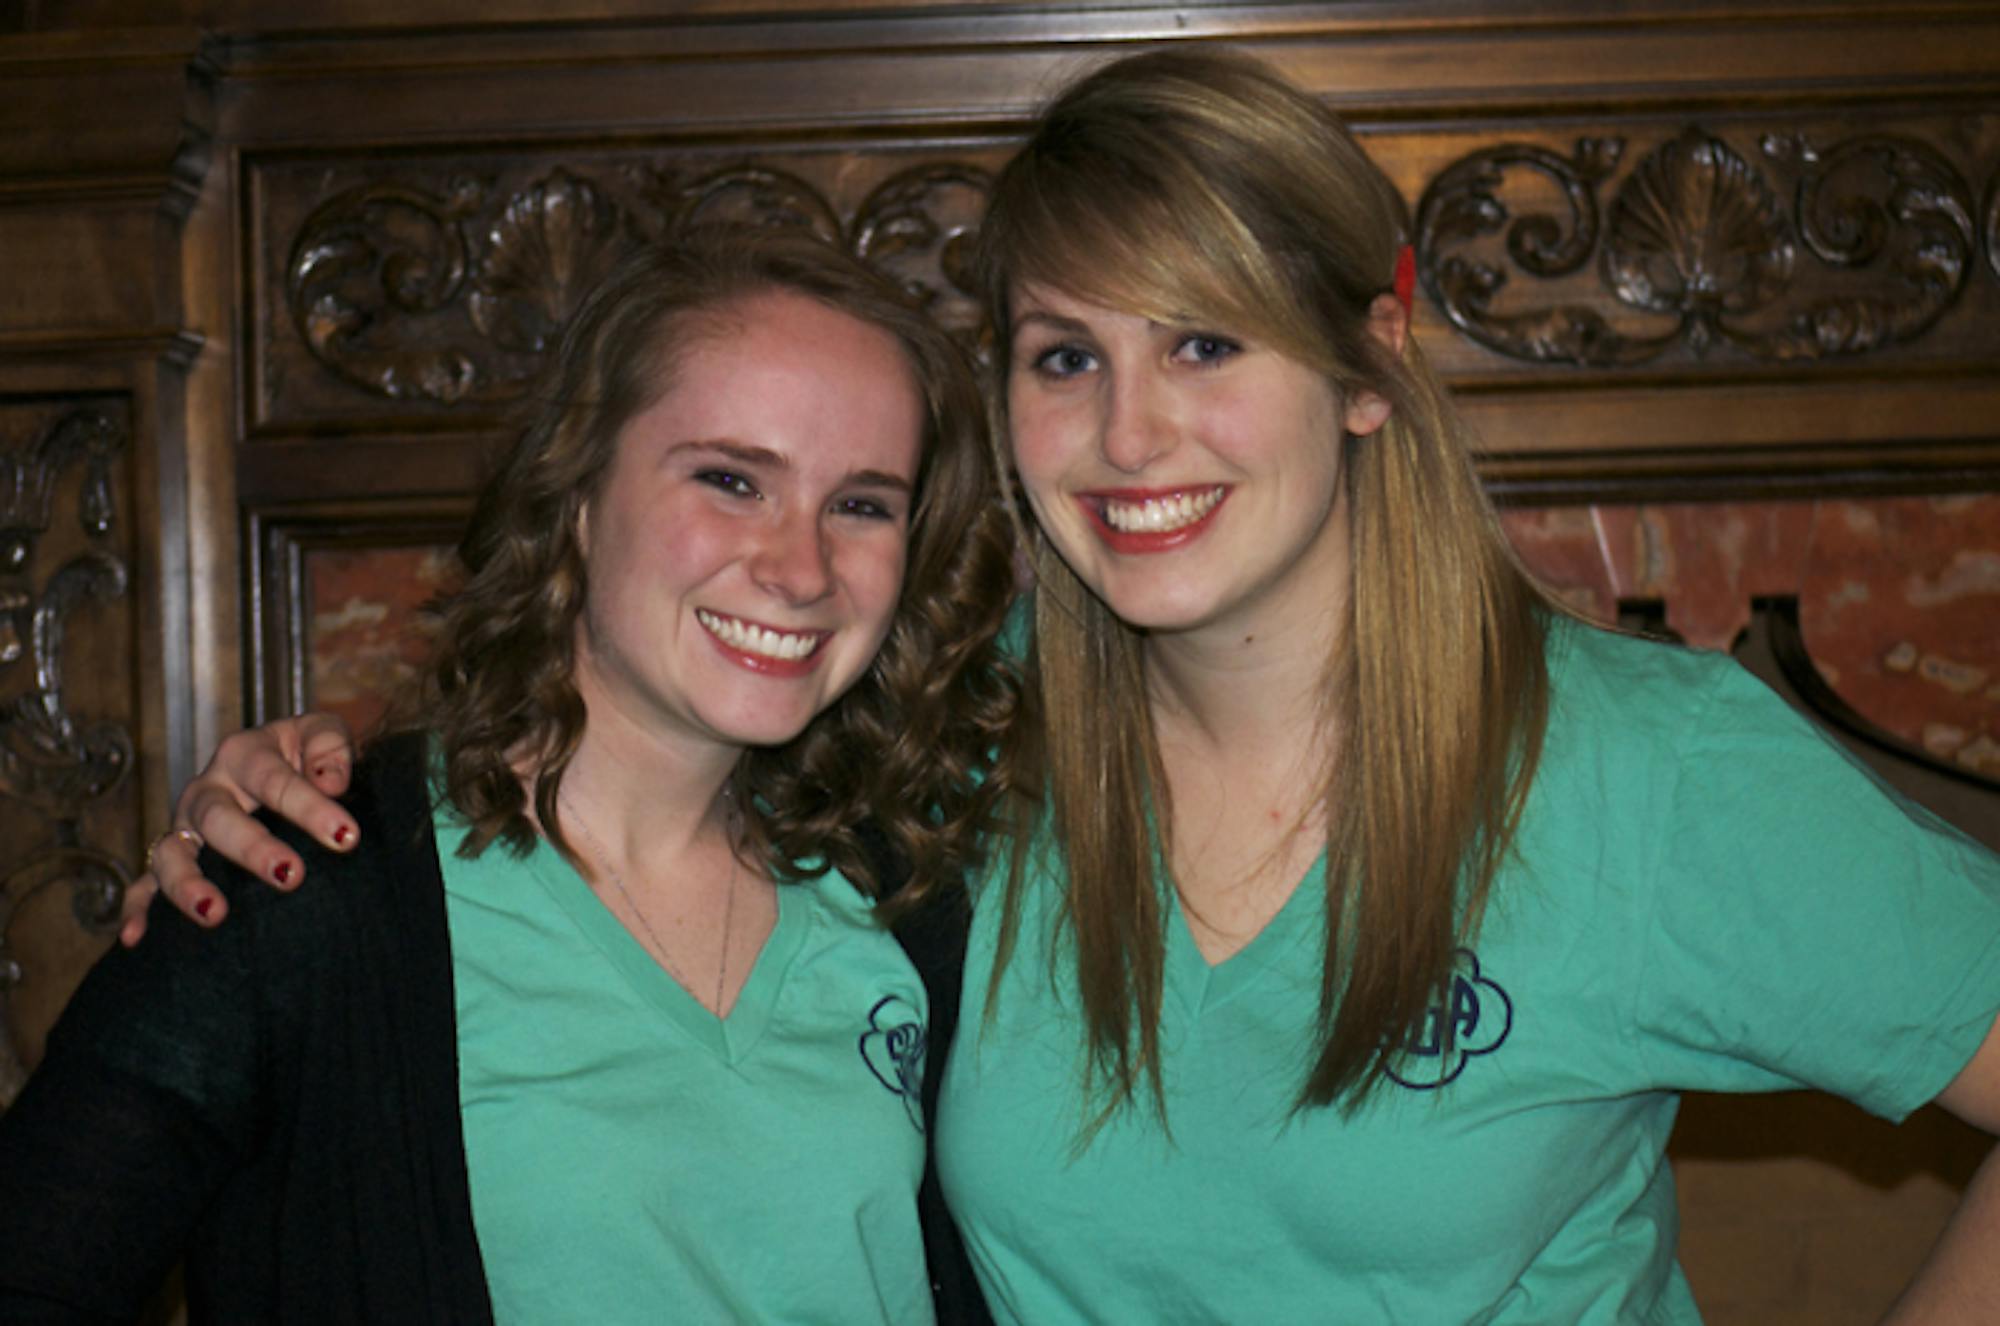 Incoming student body president McKenna Schuster (right) and vice president Sam Moorhead (left) will take office April 1.